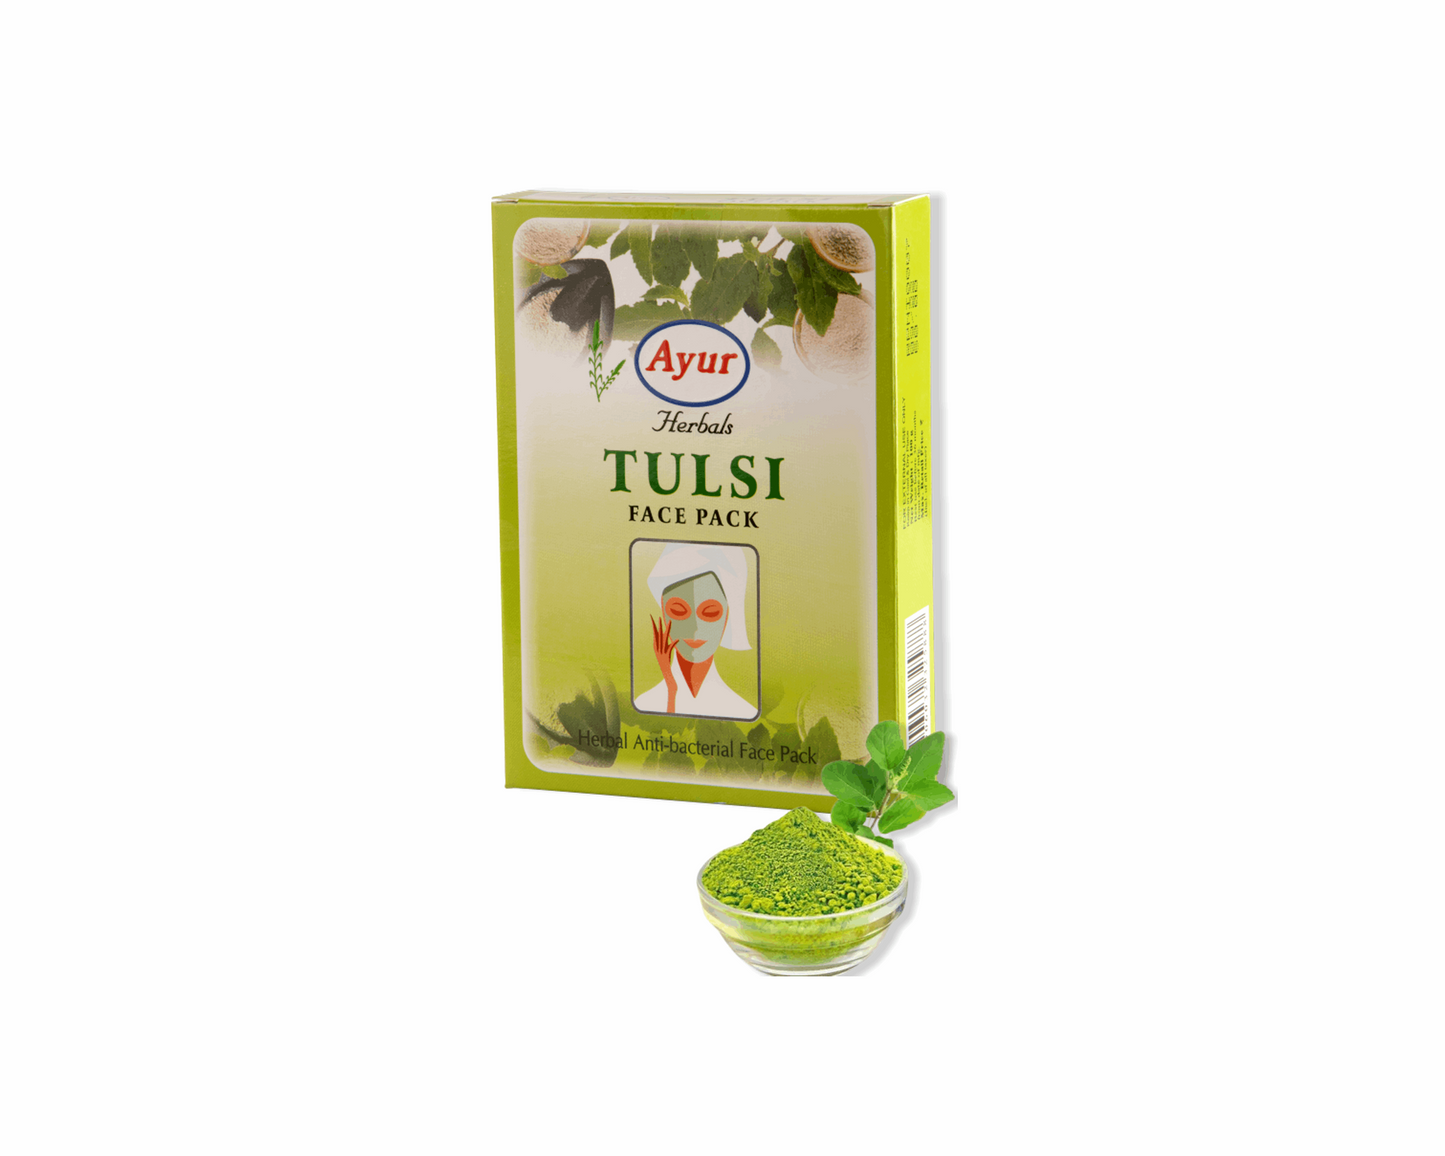 Ayur Face Pack 100g - Indian Spices